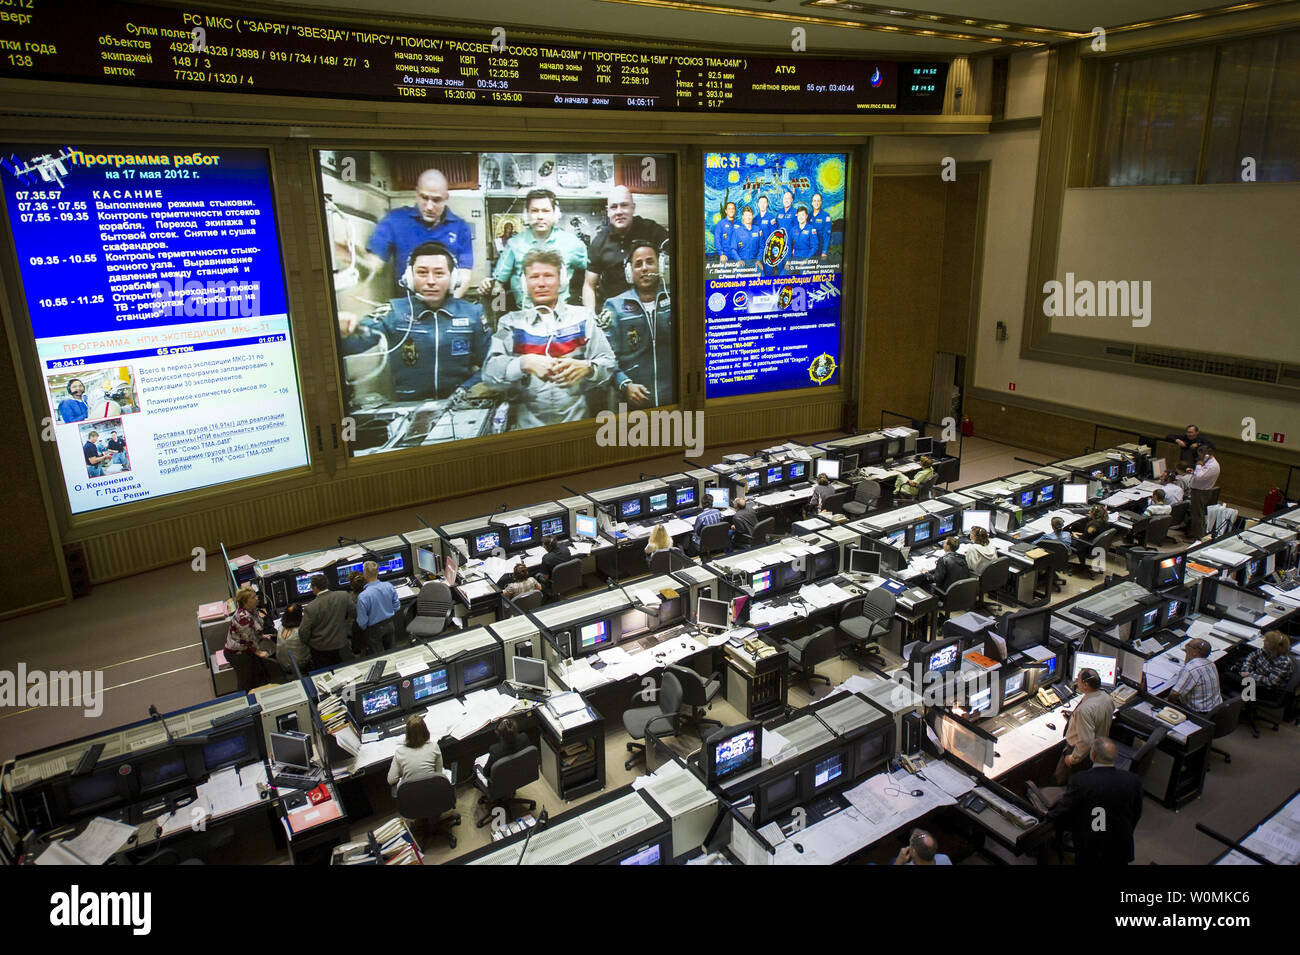 View from the balcony of the Russian Mission Control Center shows live television of the Expedition 31 crew members gathered together on the International Space Station a few hours after the Soyuz TMA-04M spacecraft docked on Thursday, May 17, 2012, in Korolev, Russia. Pictured are Expedition crew members NASA Flight Engineer Don Pettit, back left, Oleg Kononenko of Russia, ESA (European Space Agency) astronaut and Flight Engineer Andre Kuipers, back right, Flight Engineer Sergei Revin, front left, Soyuz Commander Gennady Padalka, and Flight Engineer Joe Acaba, bottom right. Padalka, Revin and Stock Photo